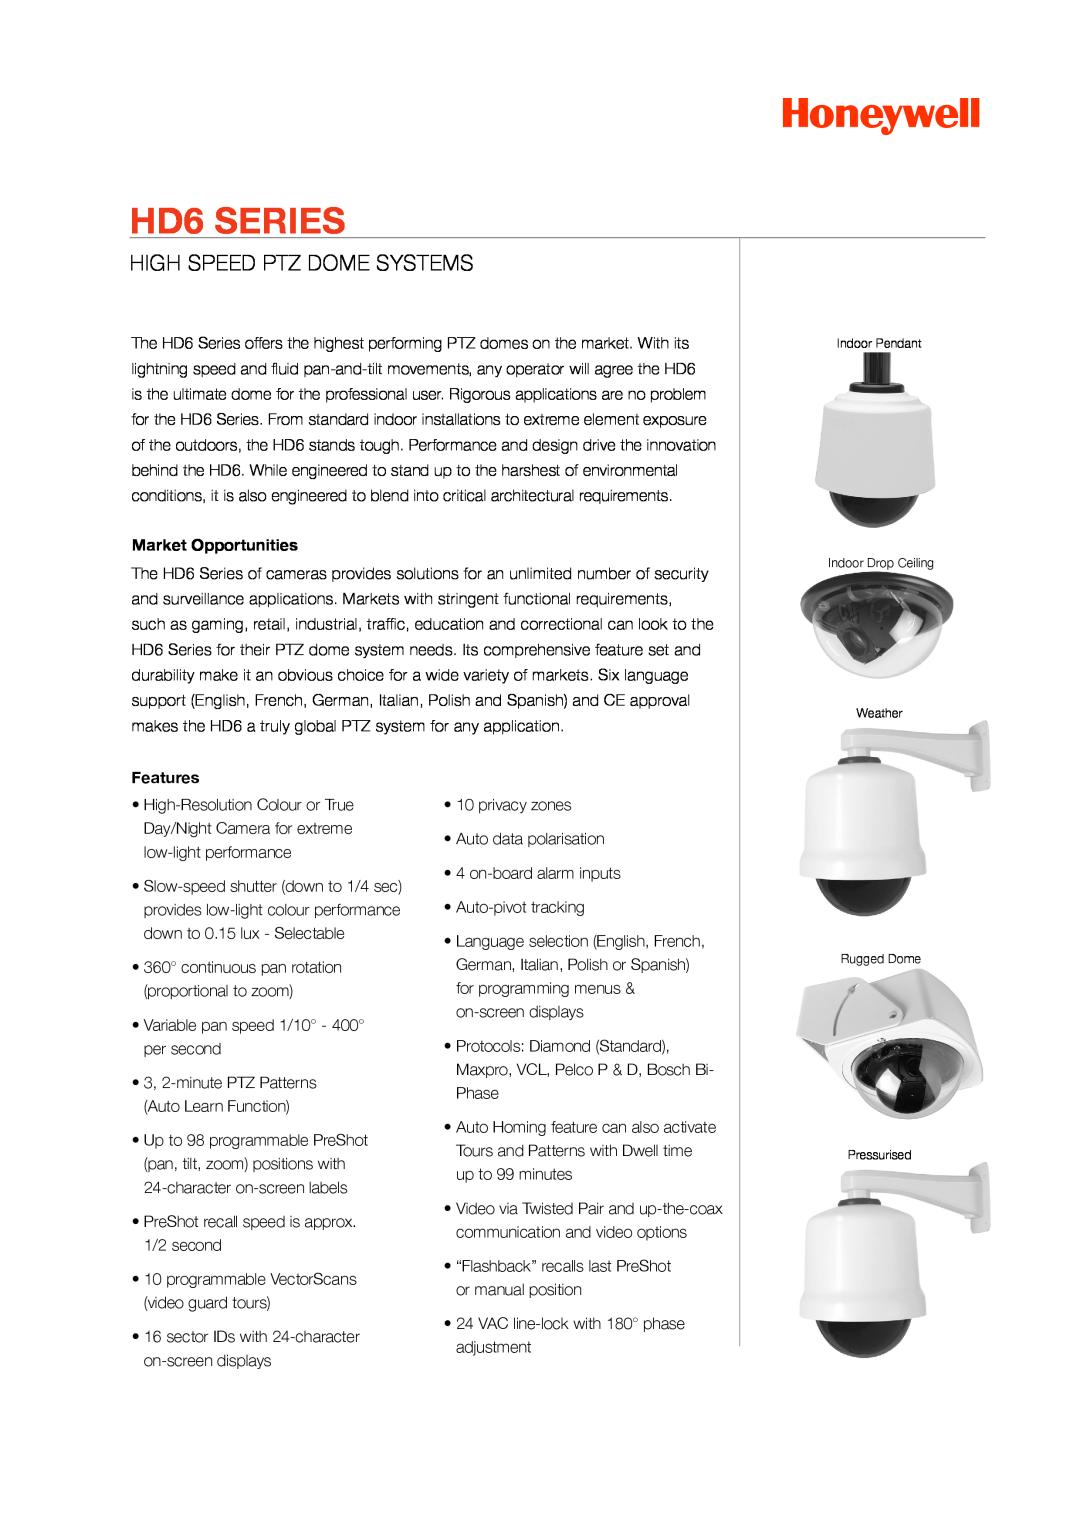 Honeywell manual HD6 SERIES, High Speed Ptz Dome Systems, Market Opportunities, Features 